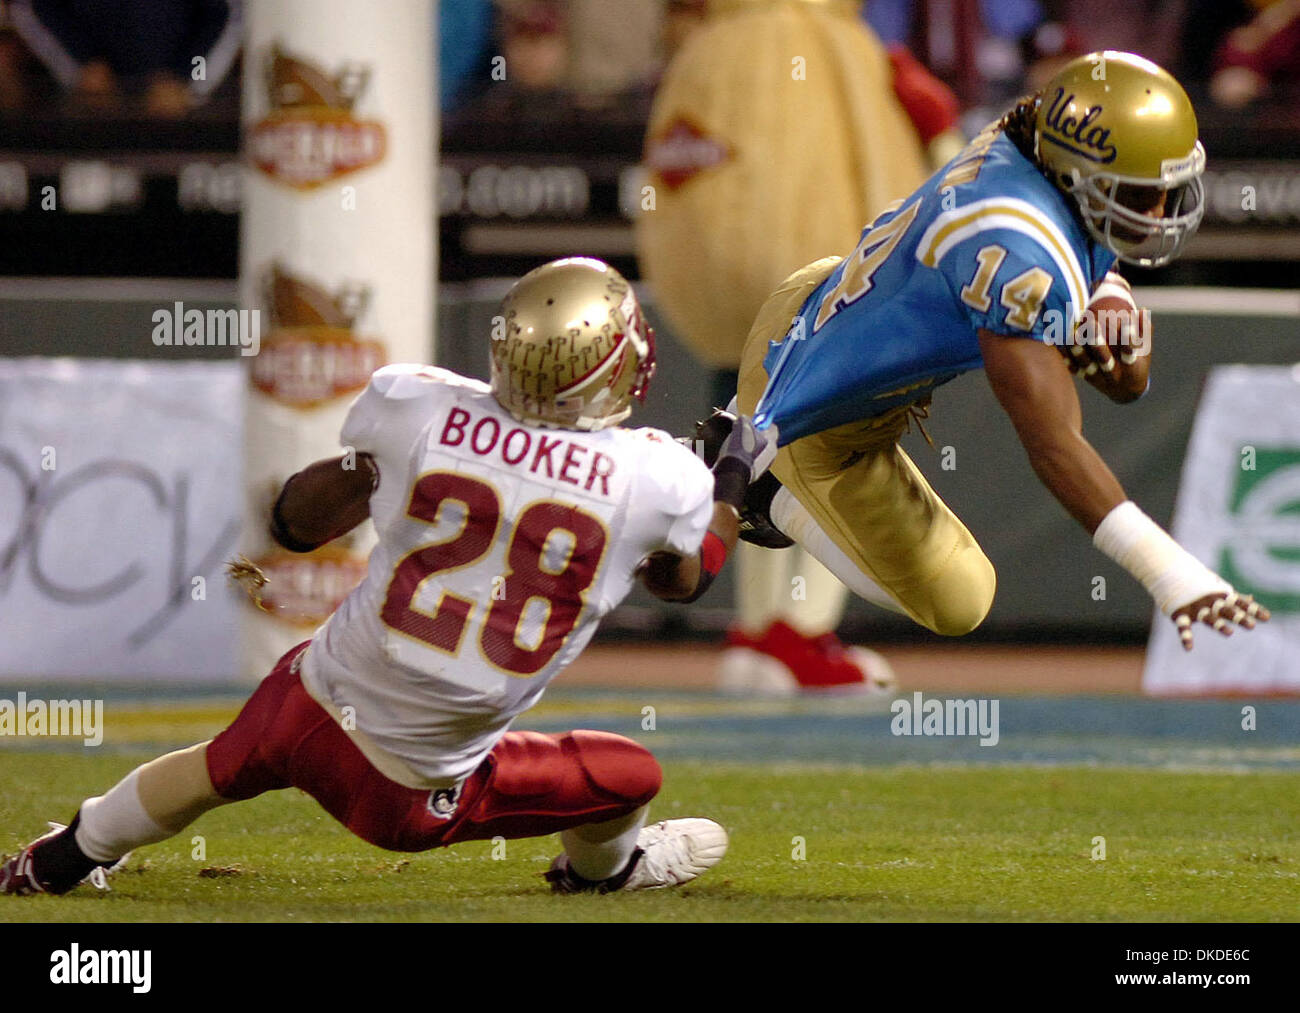 Dec 27, 2006; San Francisco, CA, USA; #14 CHRIS HORTON of UCLA intercepts a Florida State pass to #28 LORENZO BOOKER in the first quarter of the Emerald Bowl on Wednesday, Dec. 27, 2006, at AT&T Park. Mandatory Credit: Photo by Karl Mondon/Contra Costa Times/ZUMA Press. (©) Copyright 2006 by Contra Costa Times Stock Photo